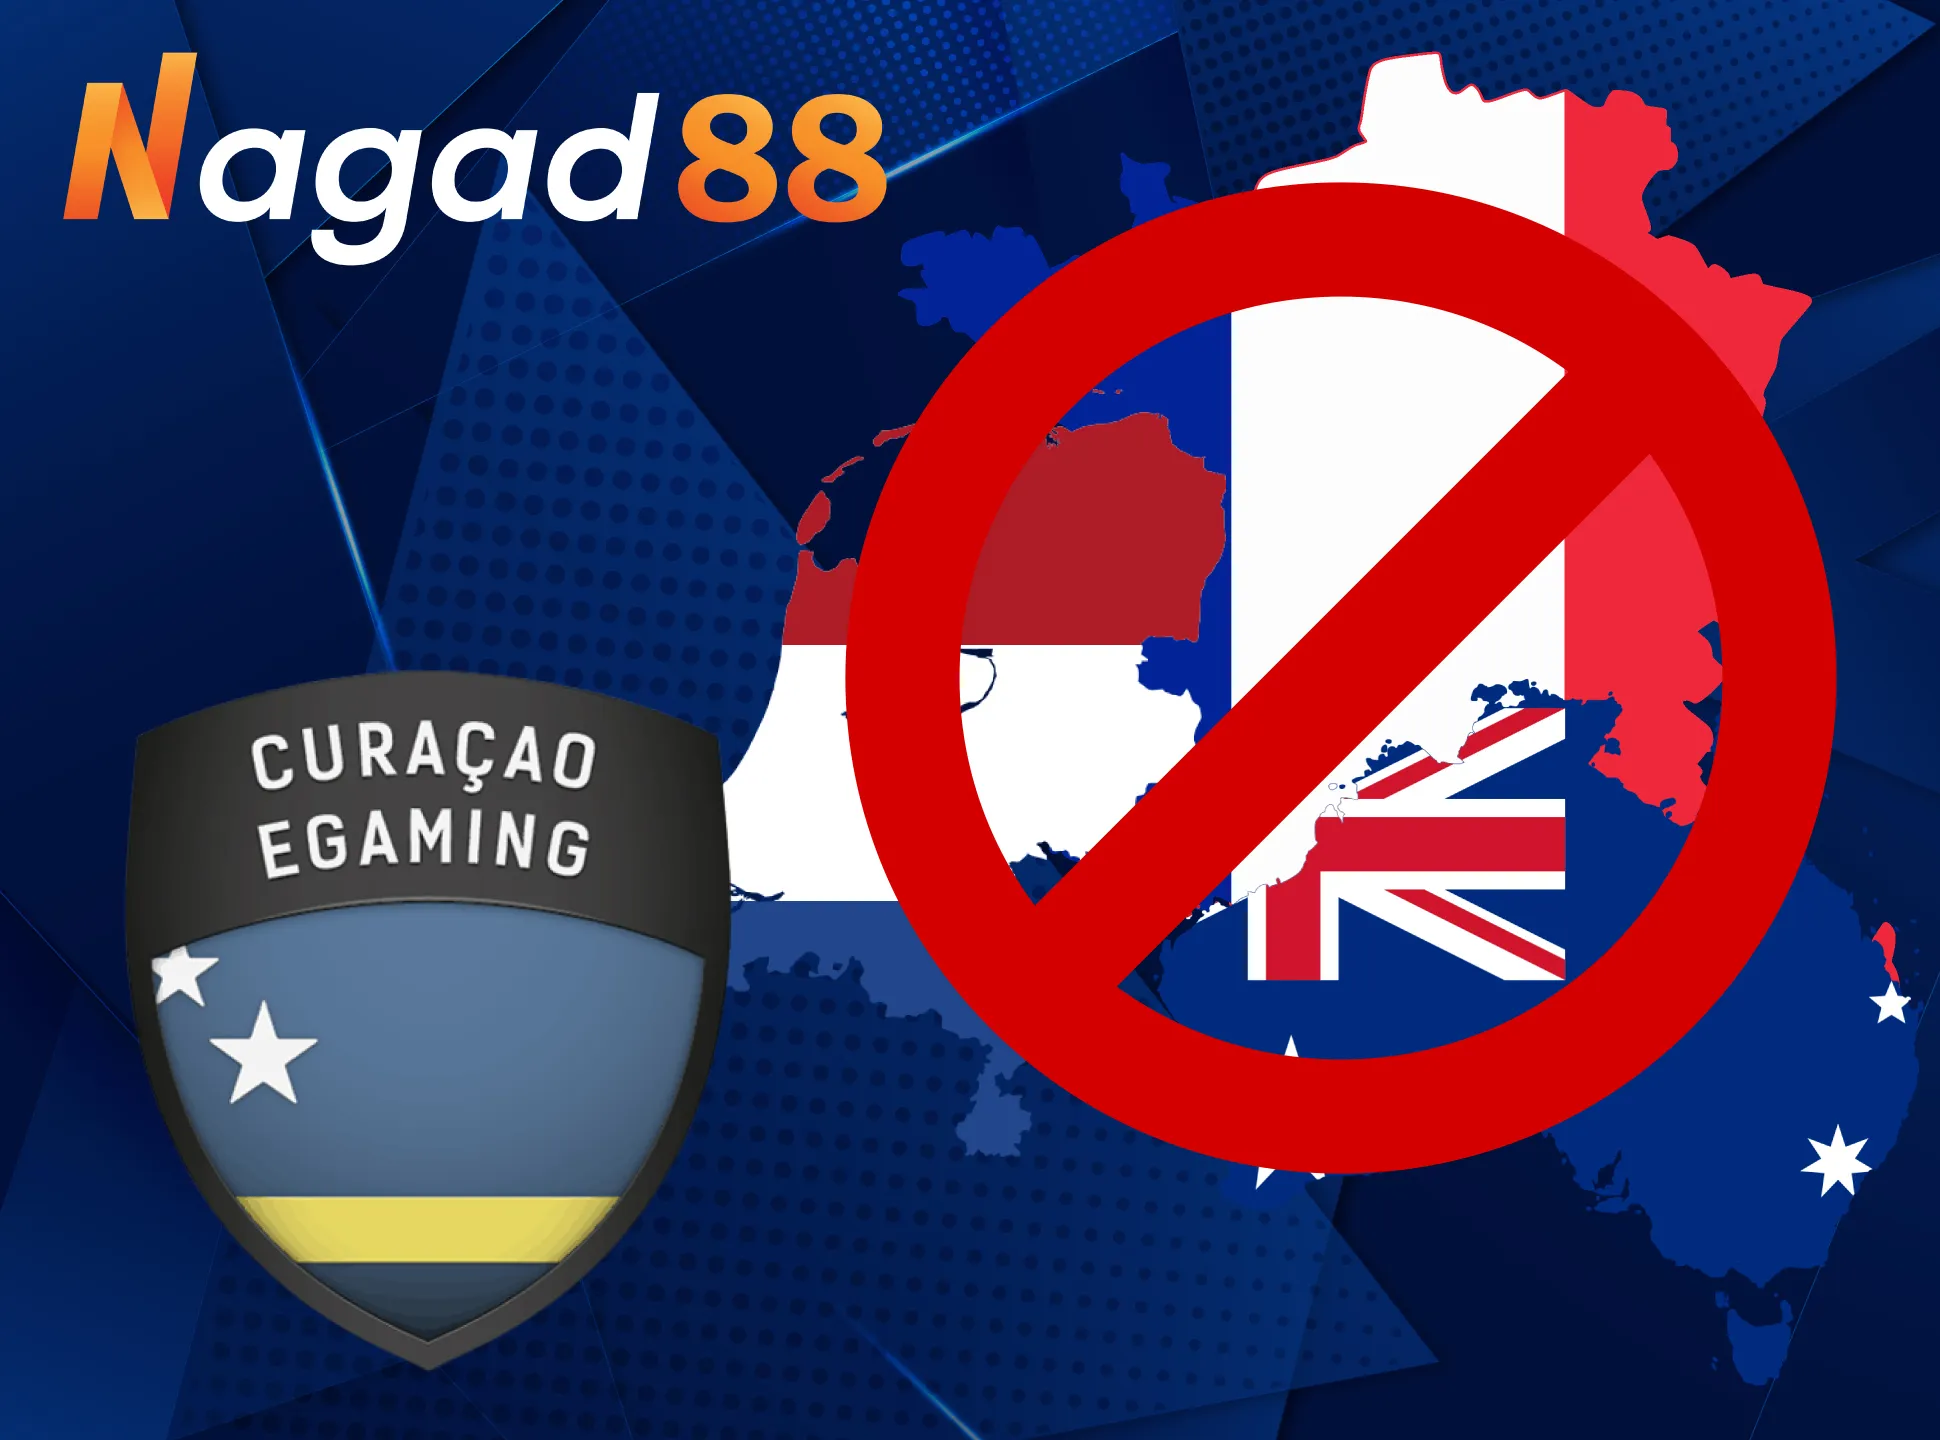 Learn about the countries where you can't access Nagad88.